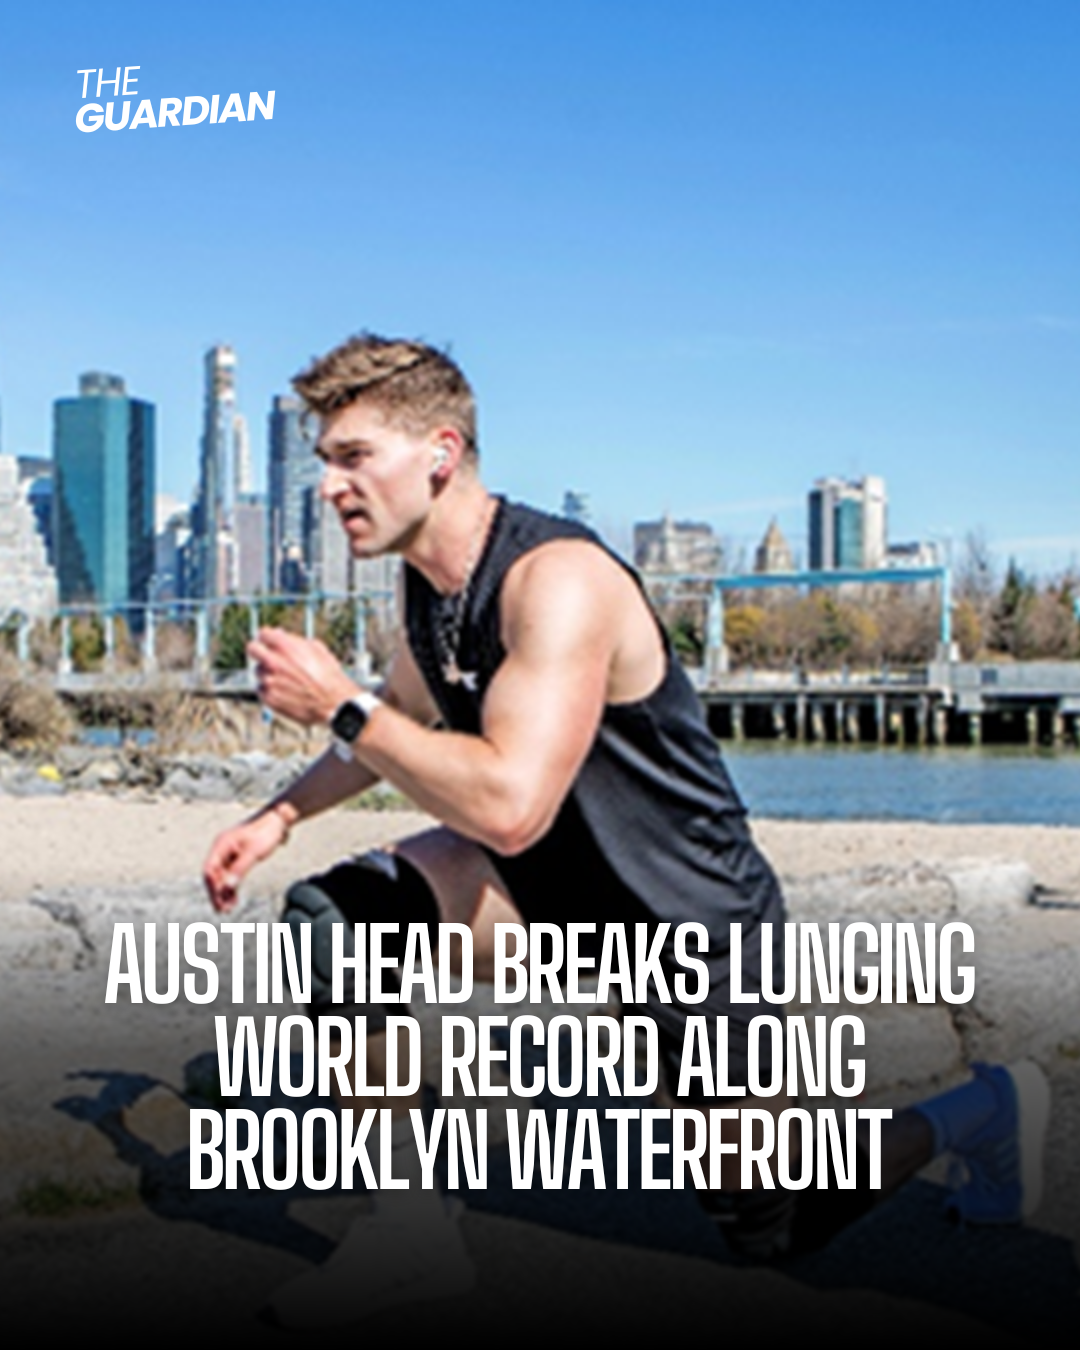 Austin Head achieved the Guinness World Record for the amount of lunges done in one hour on Monday.